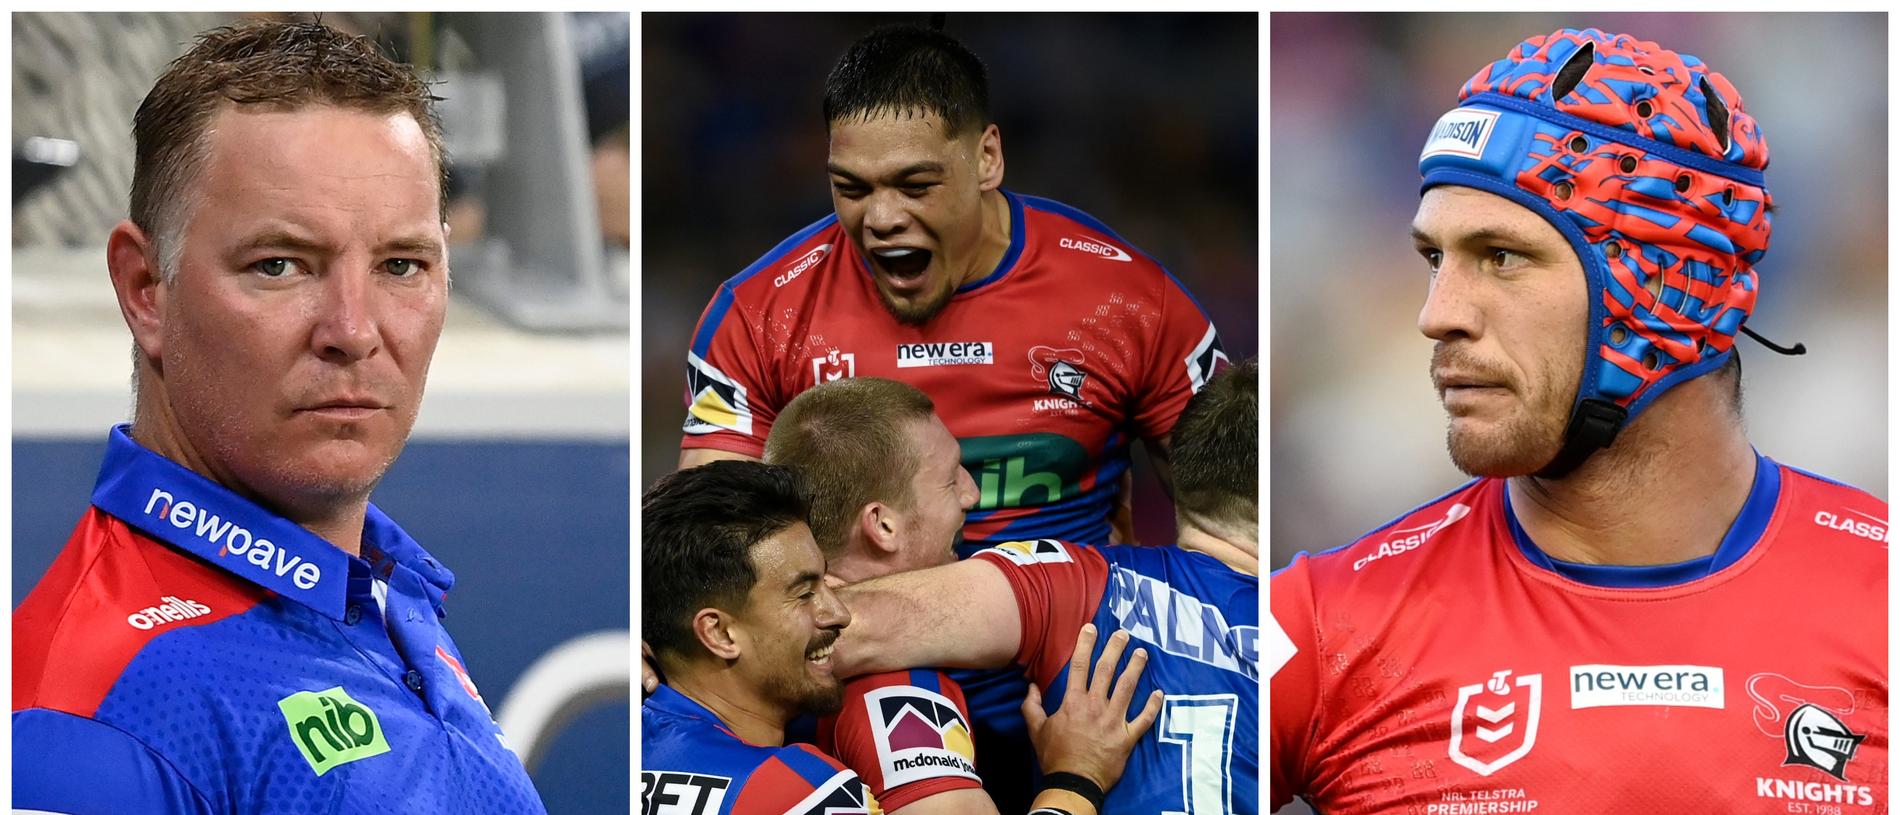 NRL Season Preview: Newcastle Knights - Edge of the Crowd